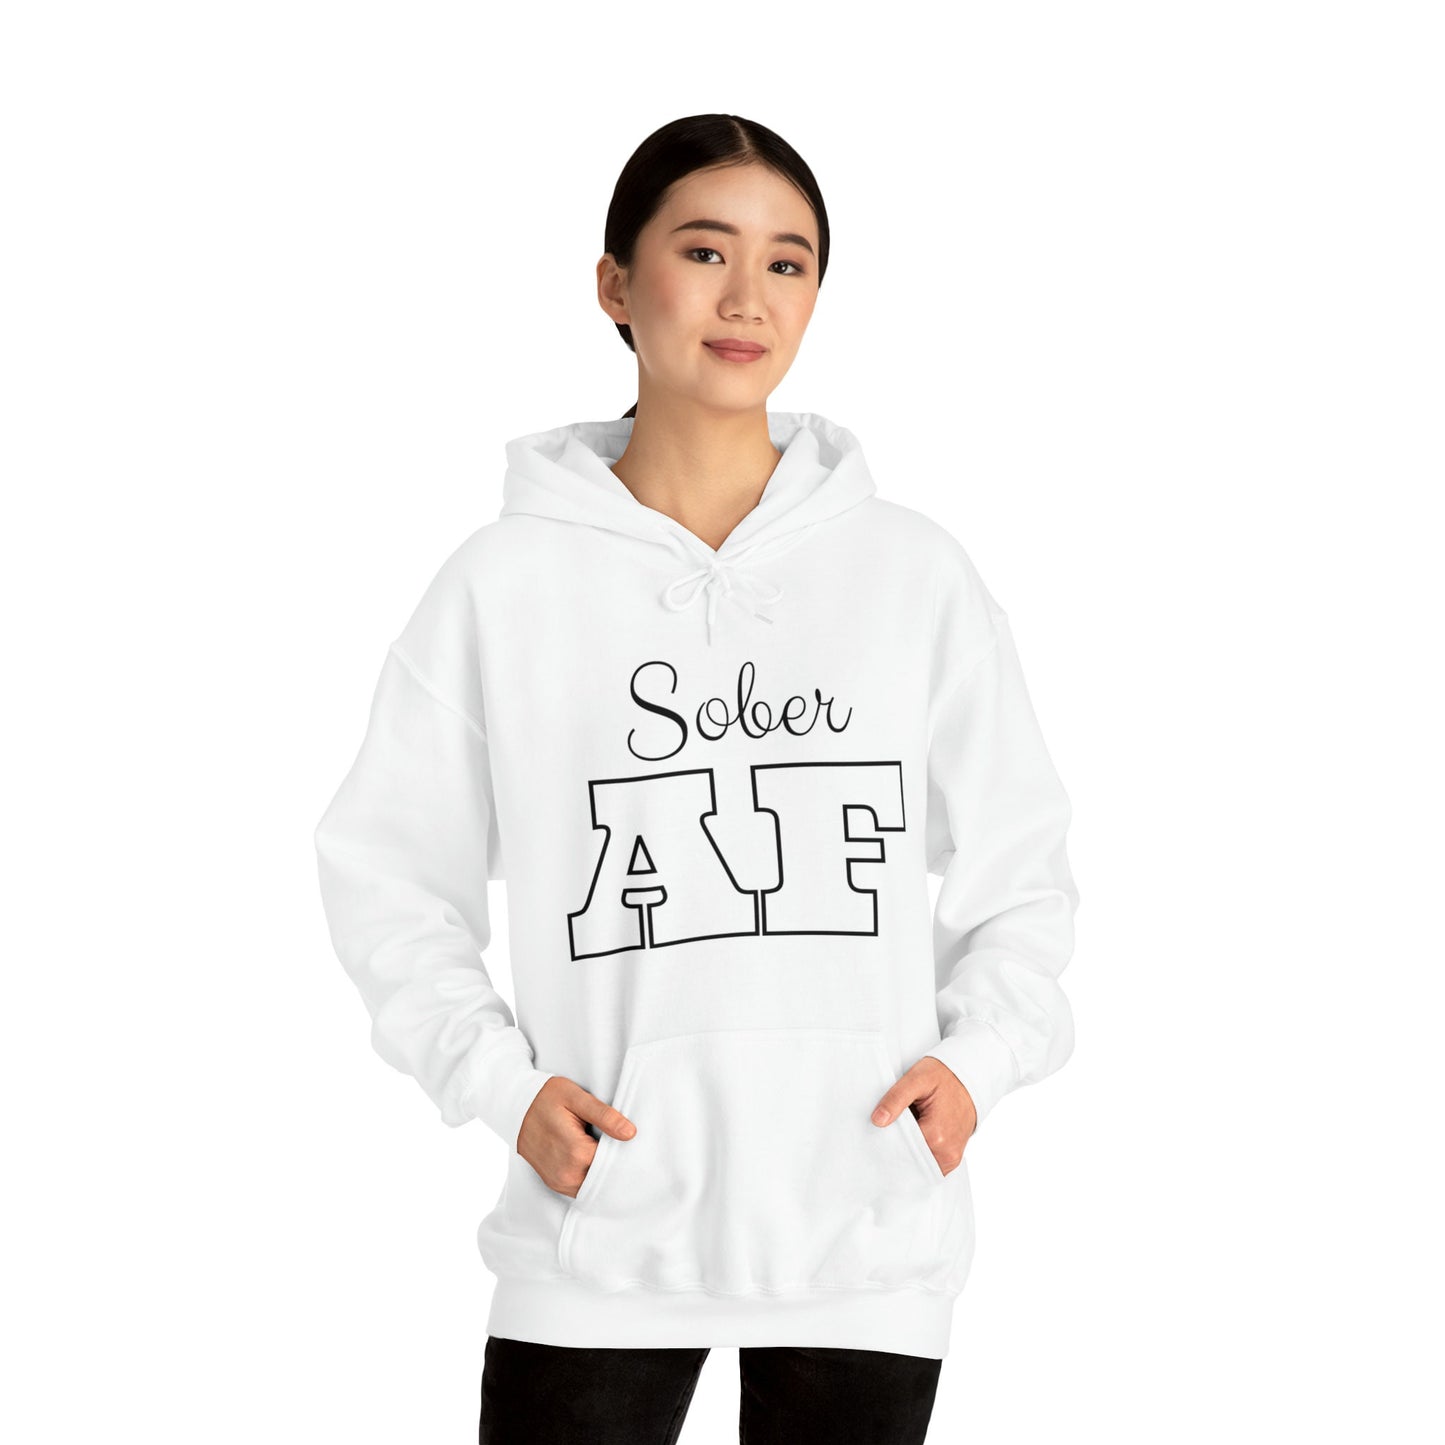 Sober AF Hoodie, Sobriety Pullover, Recovery Hooded Sweatshirt, Recovery Celebration Apparel, AA Shirts, Alcoholic Anonymous Sweatshirt - Female Model